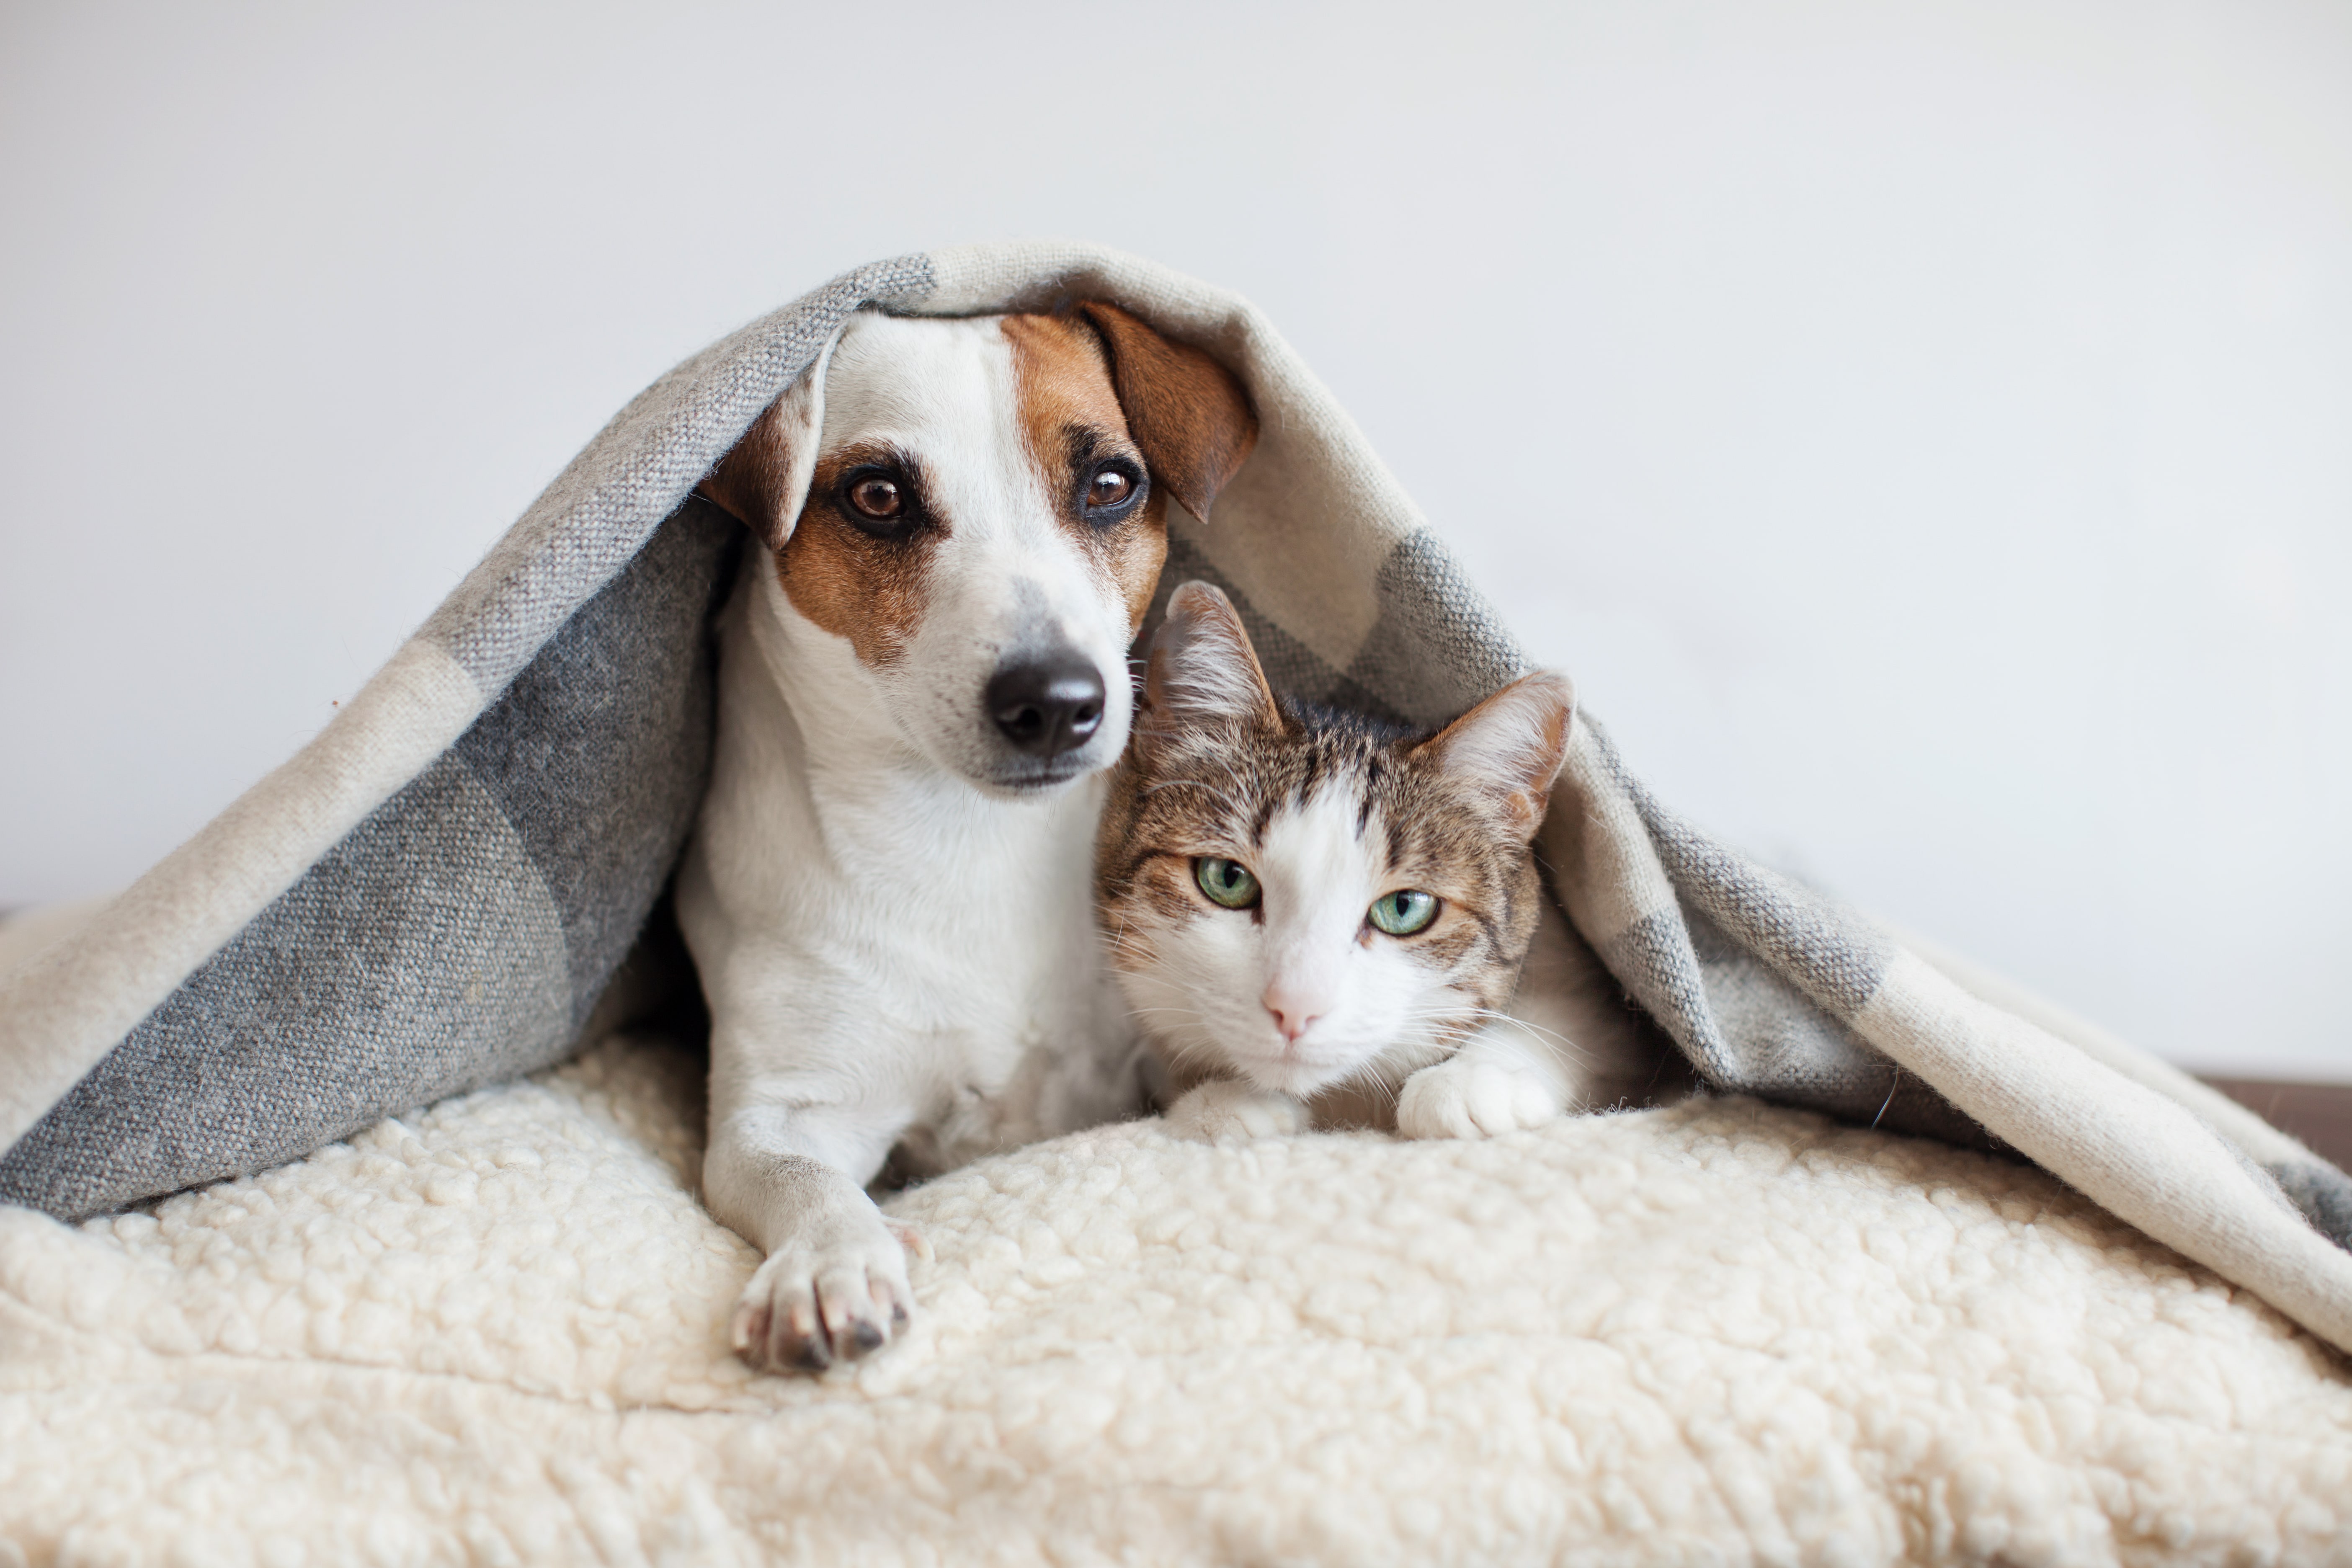 a cat and a dog together under a sheet